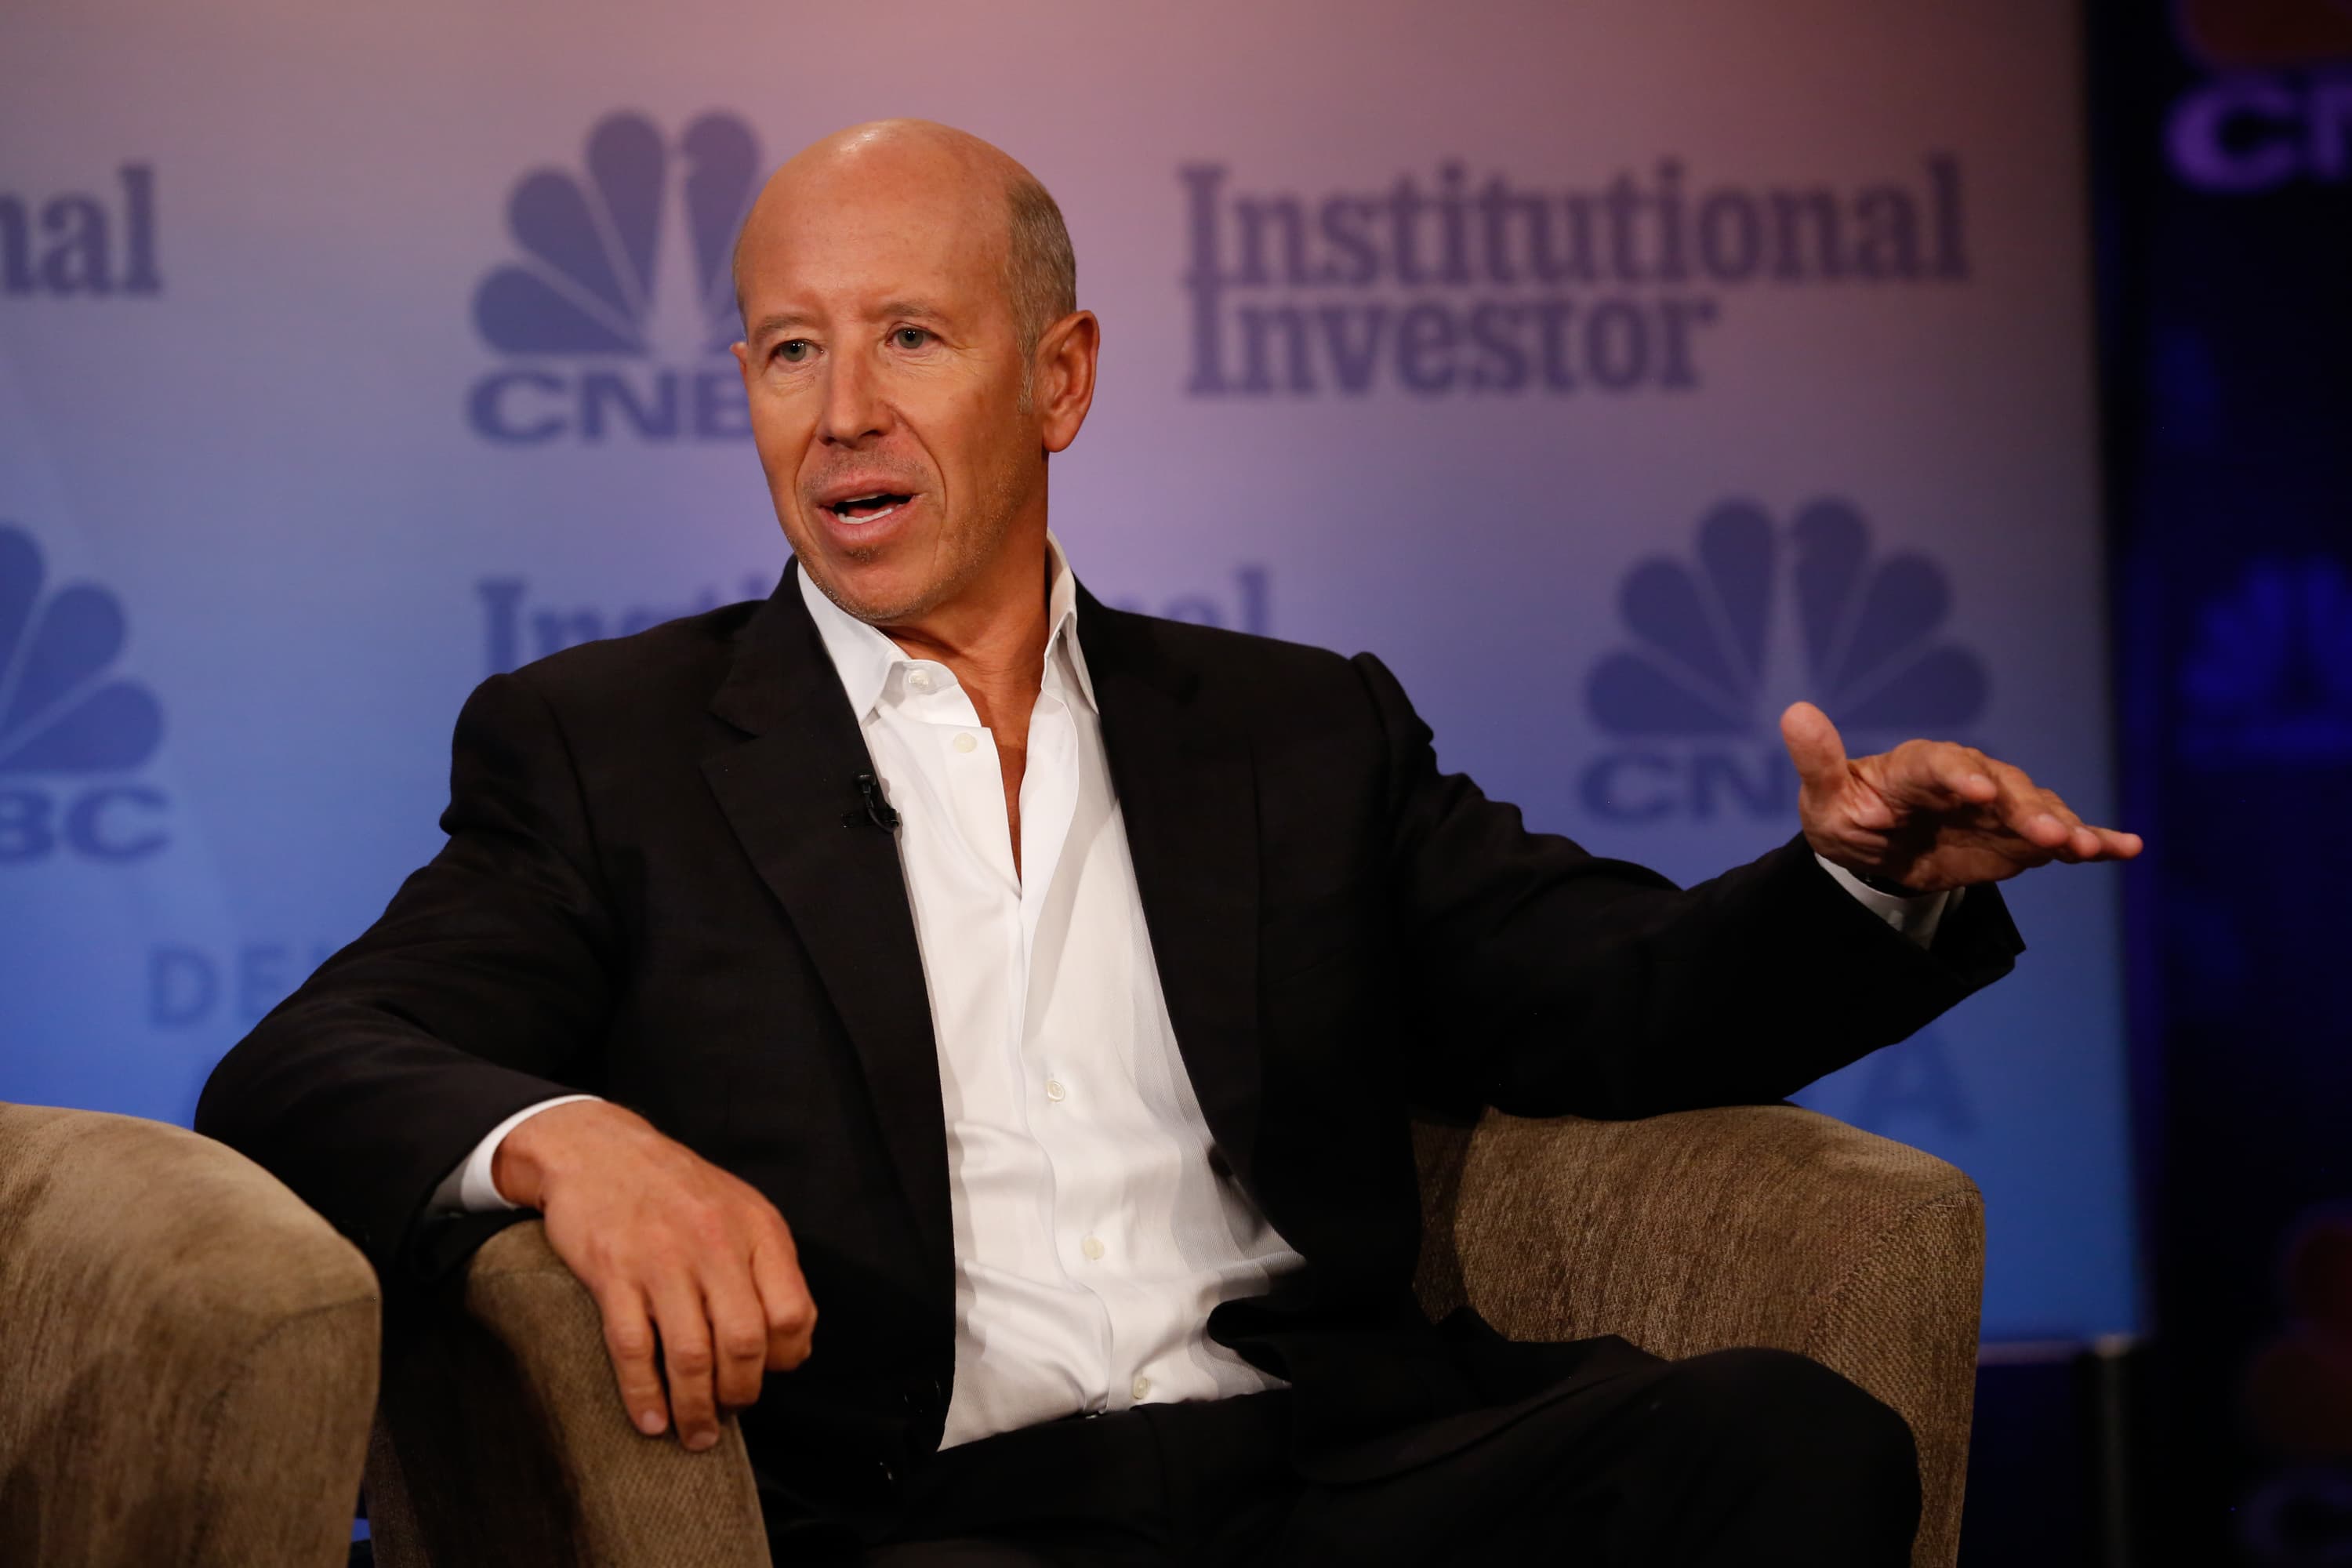 Barry Sternlicht says the ‘deck is stacked’ in China and he’s not a fan of investing there